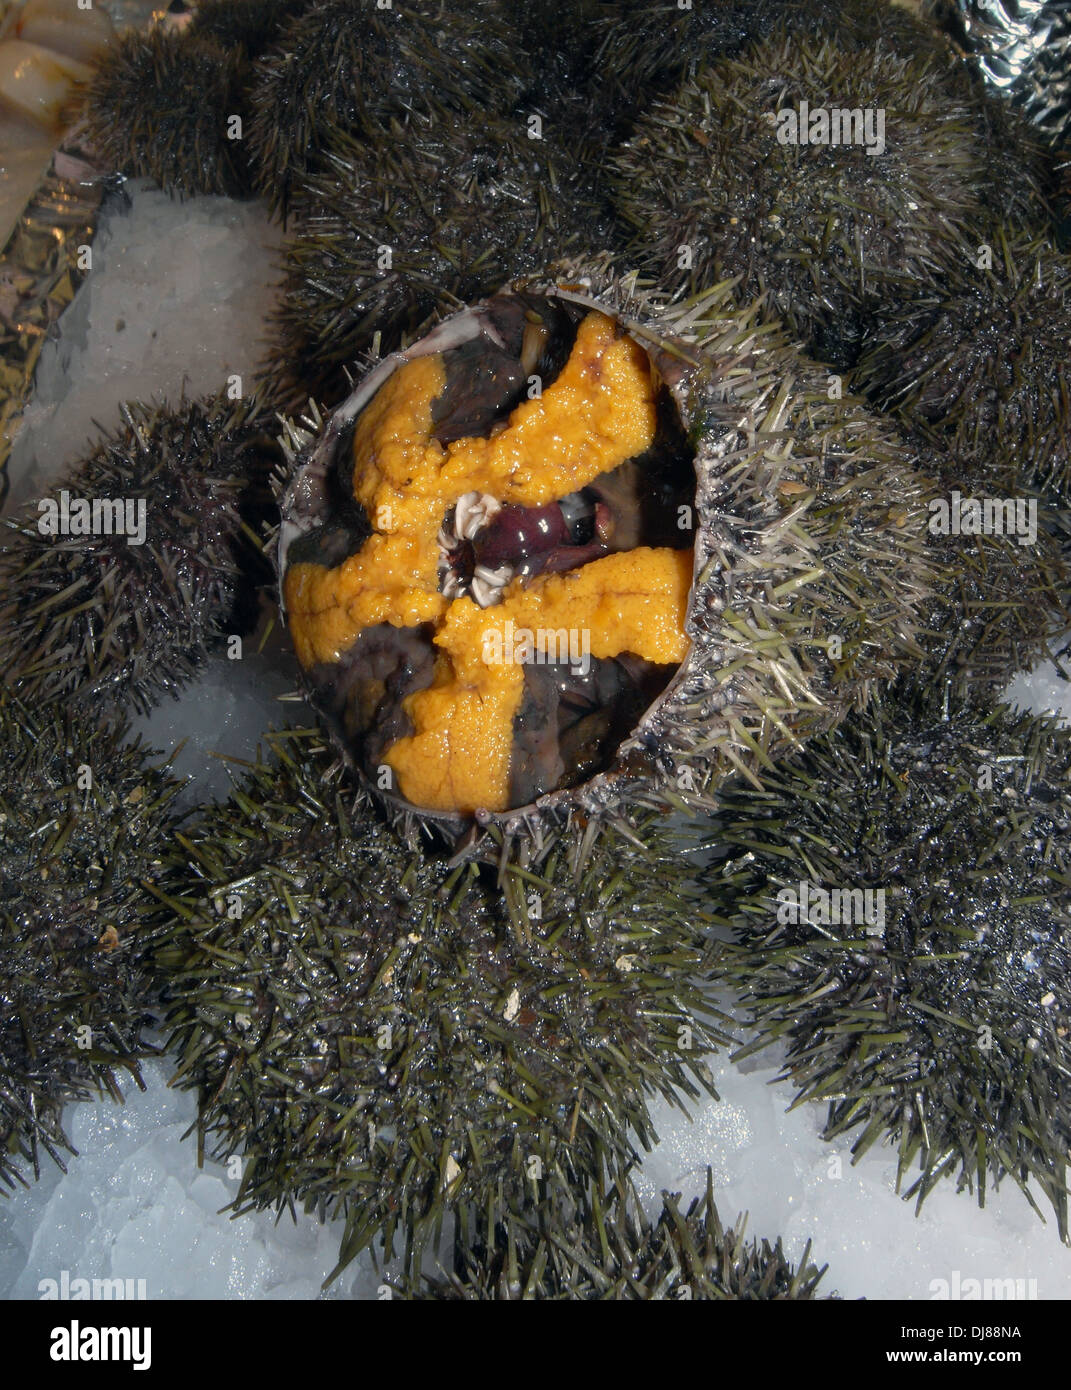 Sea urchins (oursins) for sale in food market in the 15th arrondissement, Paris, France Stock Photo